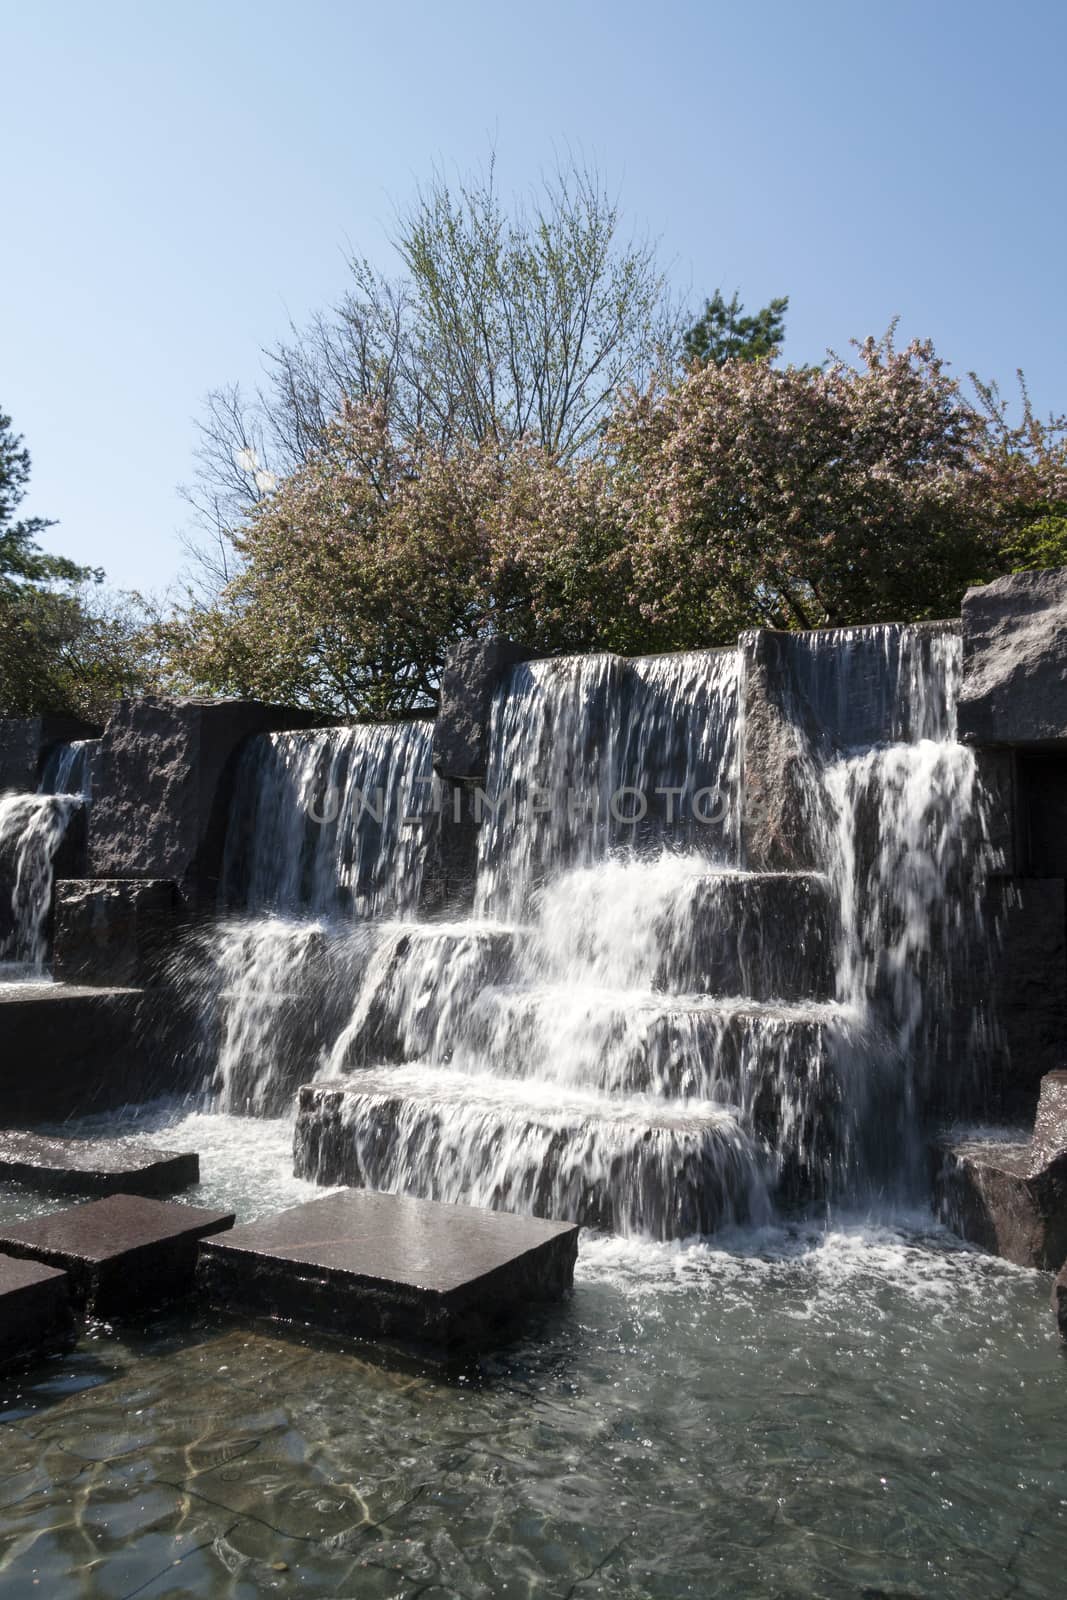 Waterfall falls of the Franklin Delano Roosevelt Memorial (FDR) in Washington D.C., USA